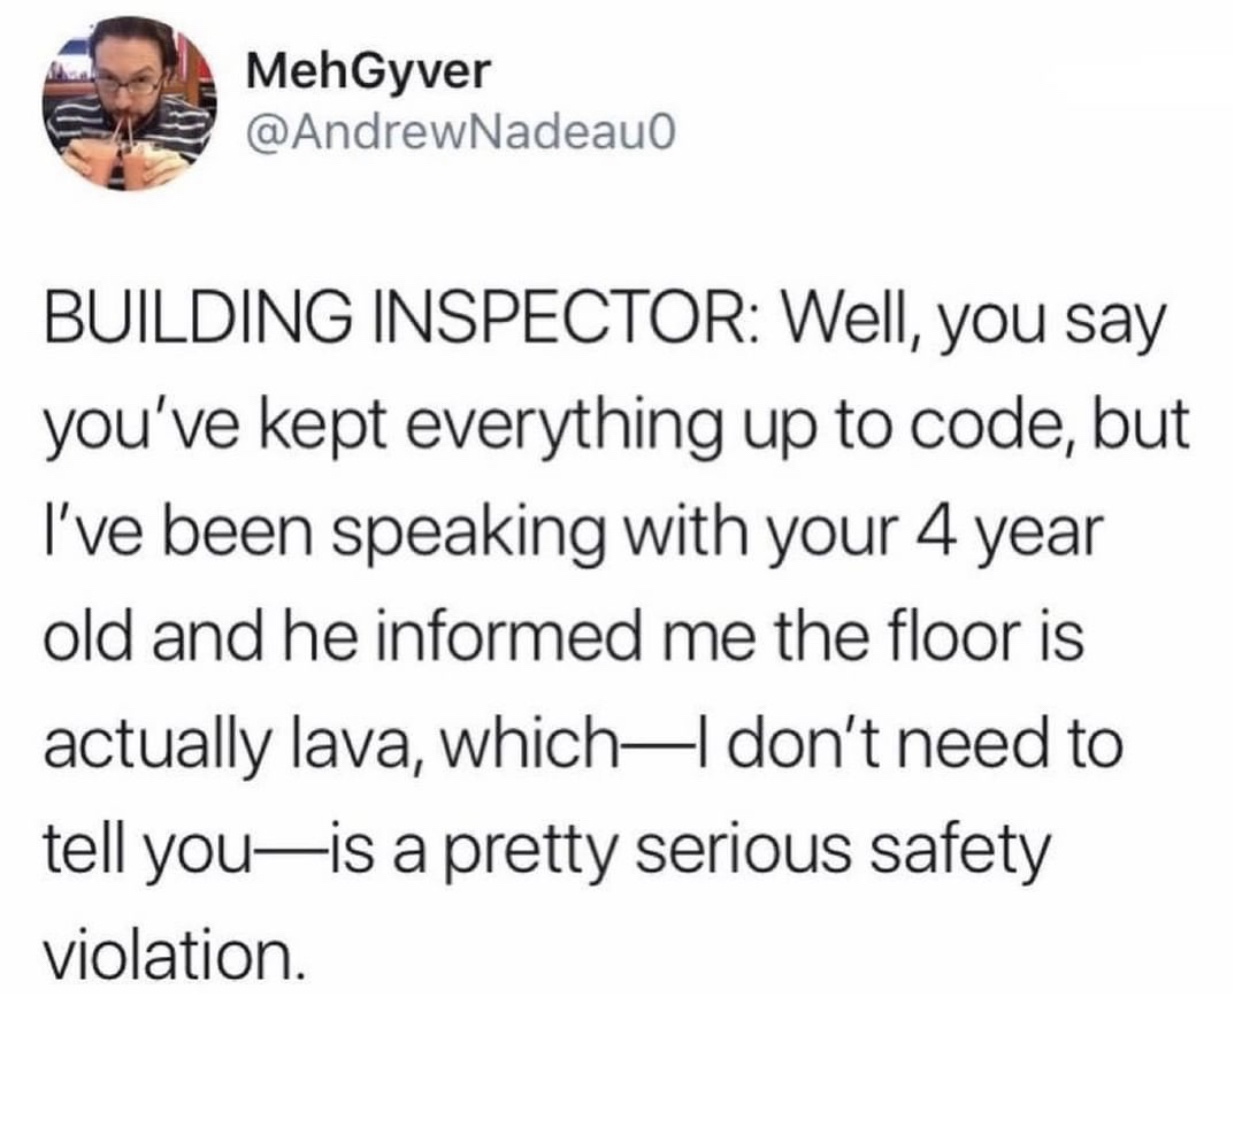 will bts disband - MehGyver Building Inspector Well, you say you've kept everything up to code, but I've been speaking with your 4 year old and he informed me the floor is actually lava, whichdon't need to tell youis a pretty serious safety violation.